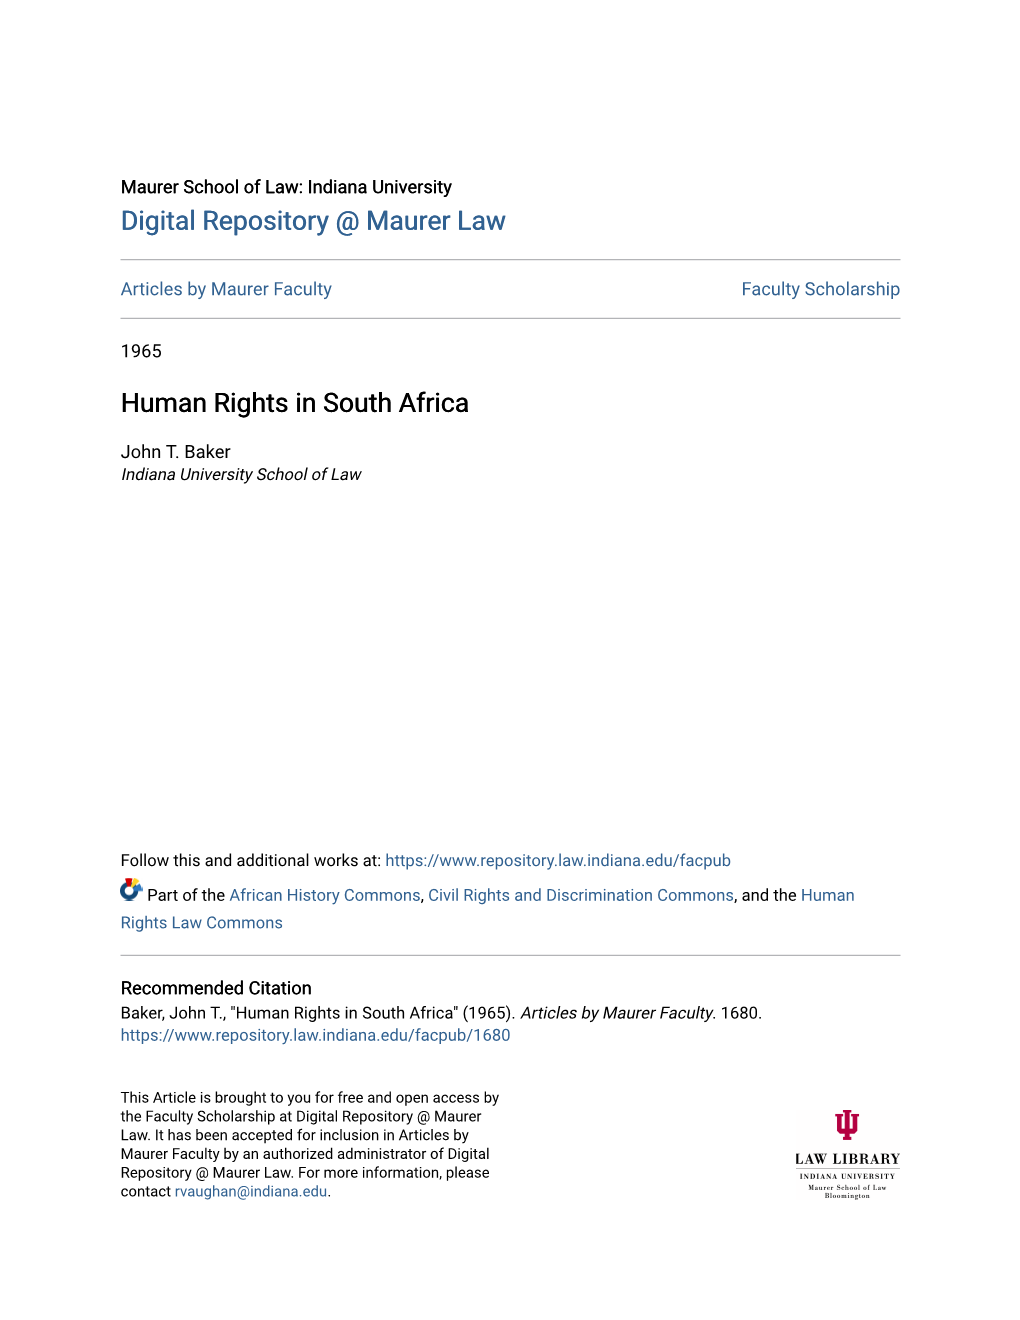 Human Rights in South Africa